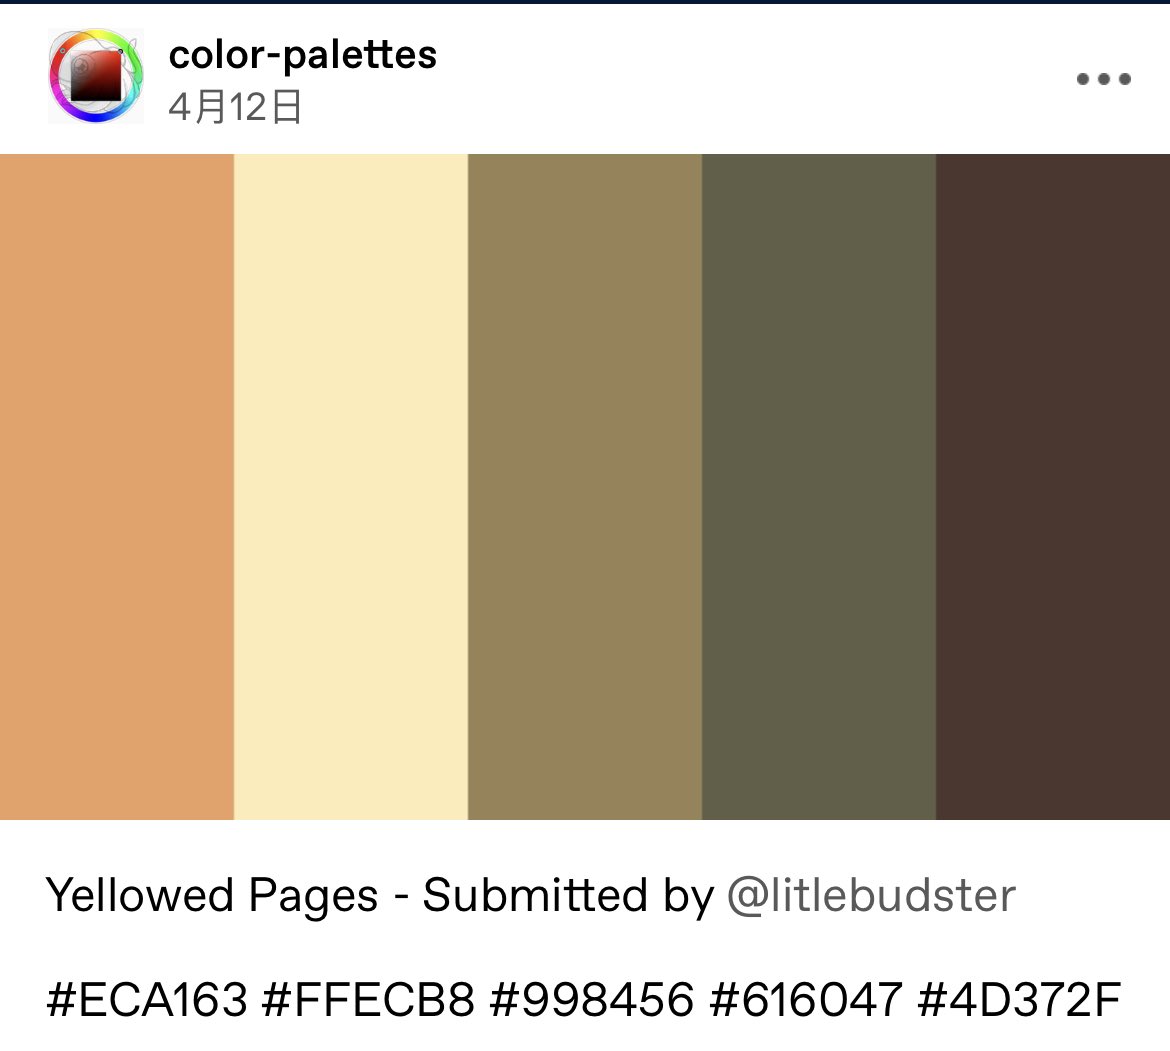 palette from color-palettes on tumblr
#DarkestDungeon